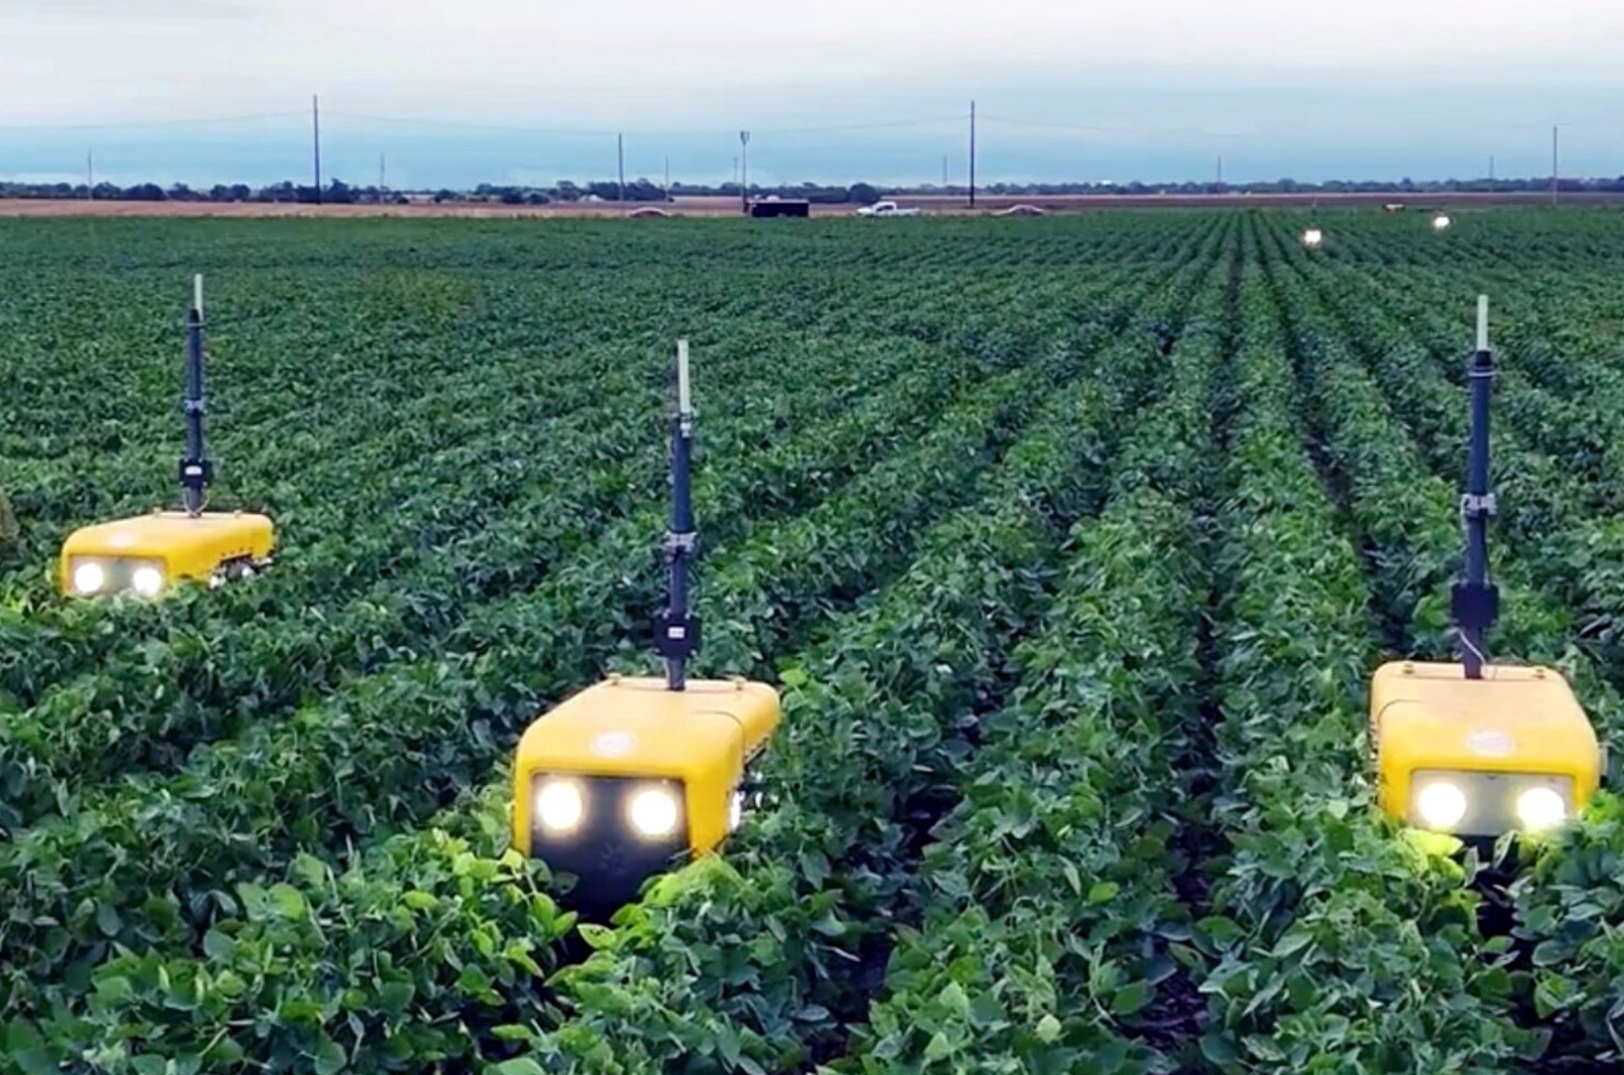 Ingredients in your burrito bowl could be grown by agbots; Chipotle’s $50M venture fund wraps investment in Kansas robotics startup